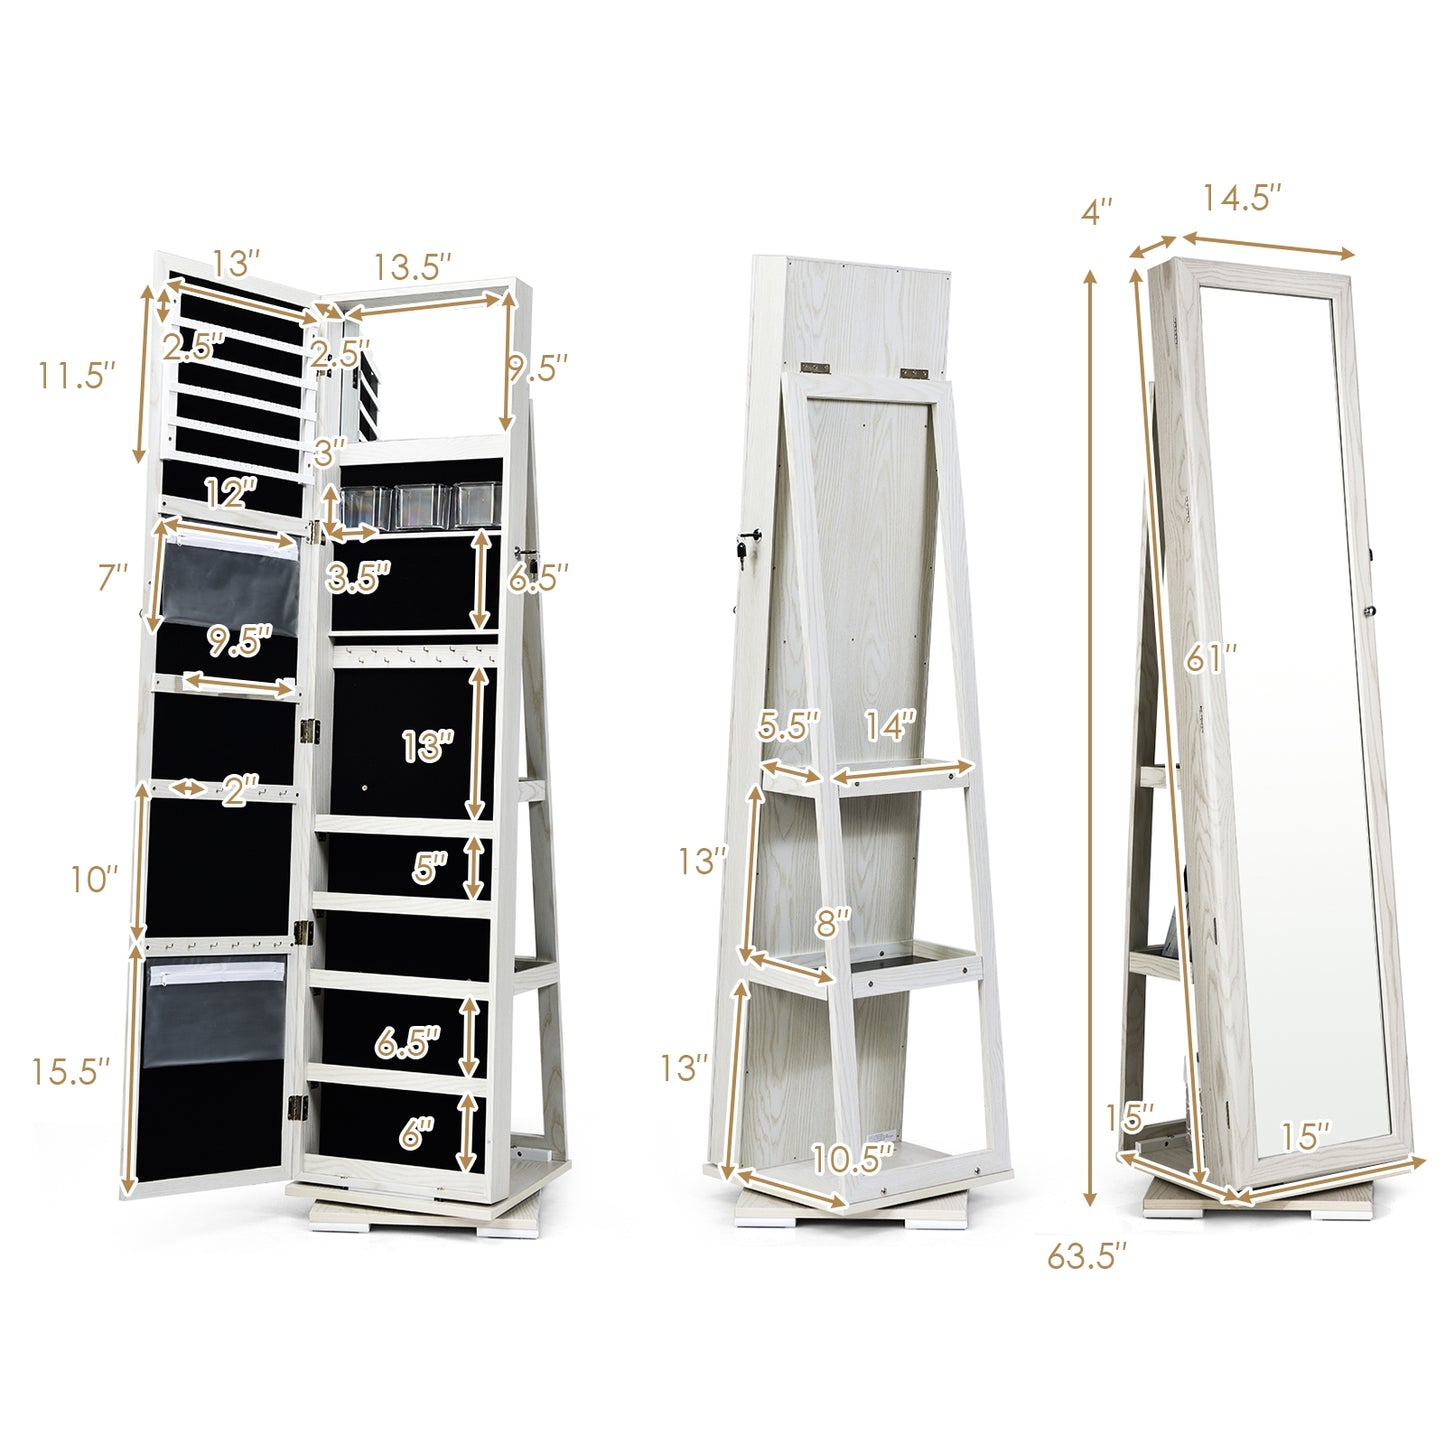 360° Rotatable 2-in-1 Lockable Jewelry Cabinet with Full-Length Mirror-White